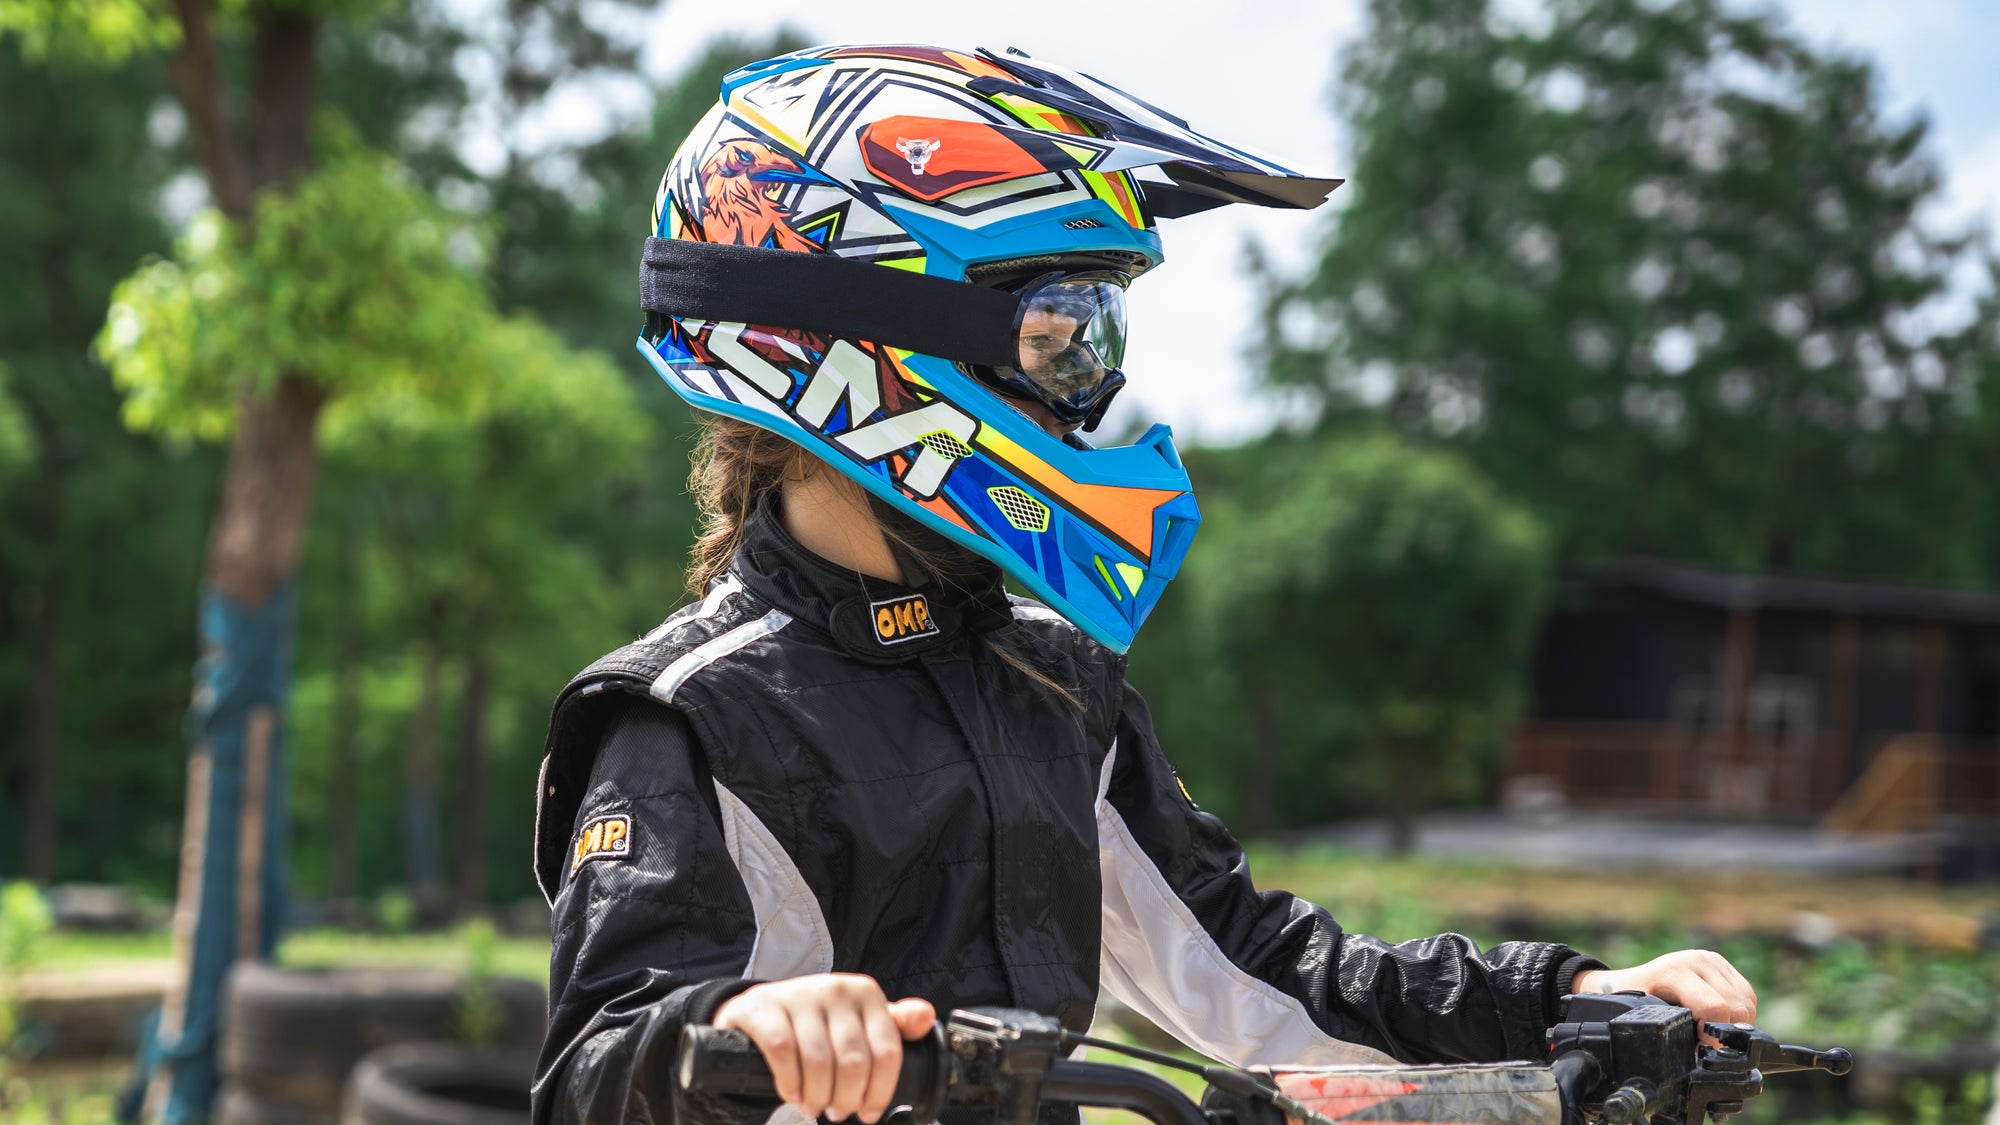 Five key things you must pay attention to when choosing a helmet